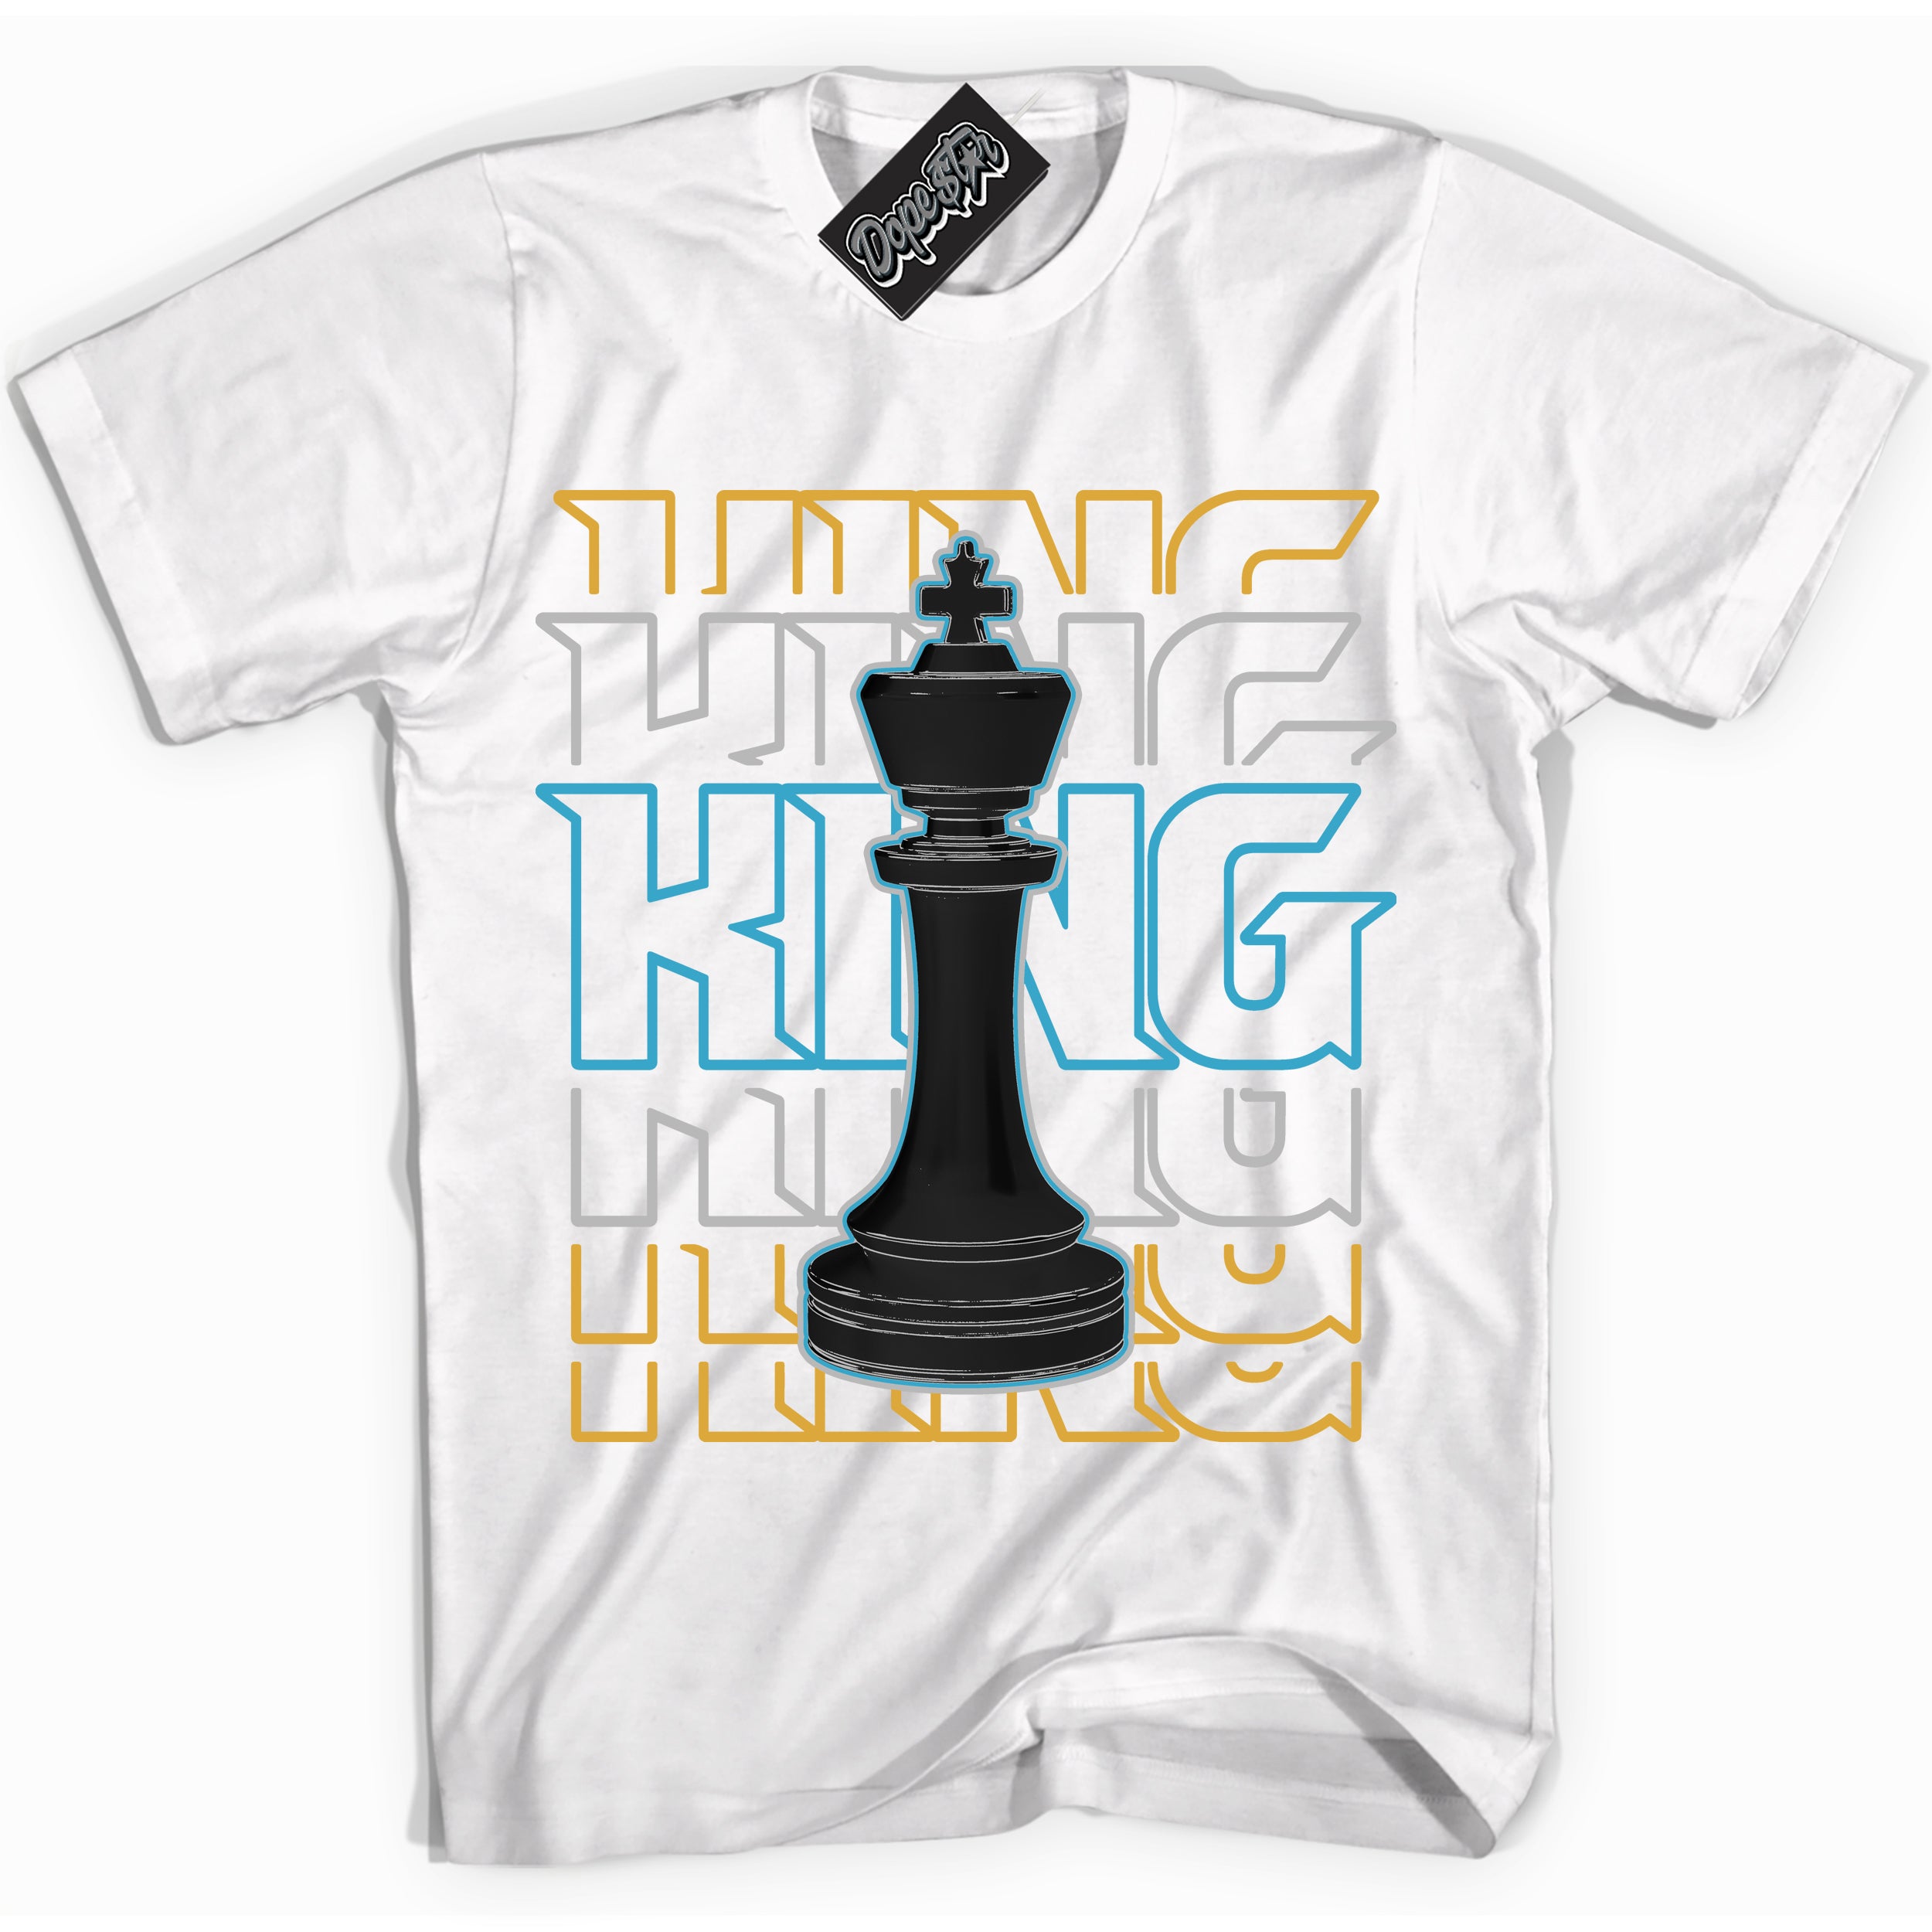 Cool White Shirt with “ King Chess” design that perfectly matches Aqua 5s Sneakers.